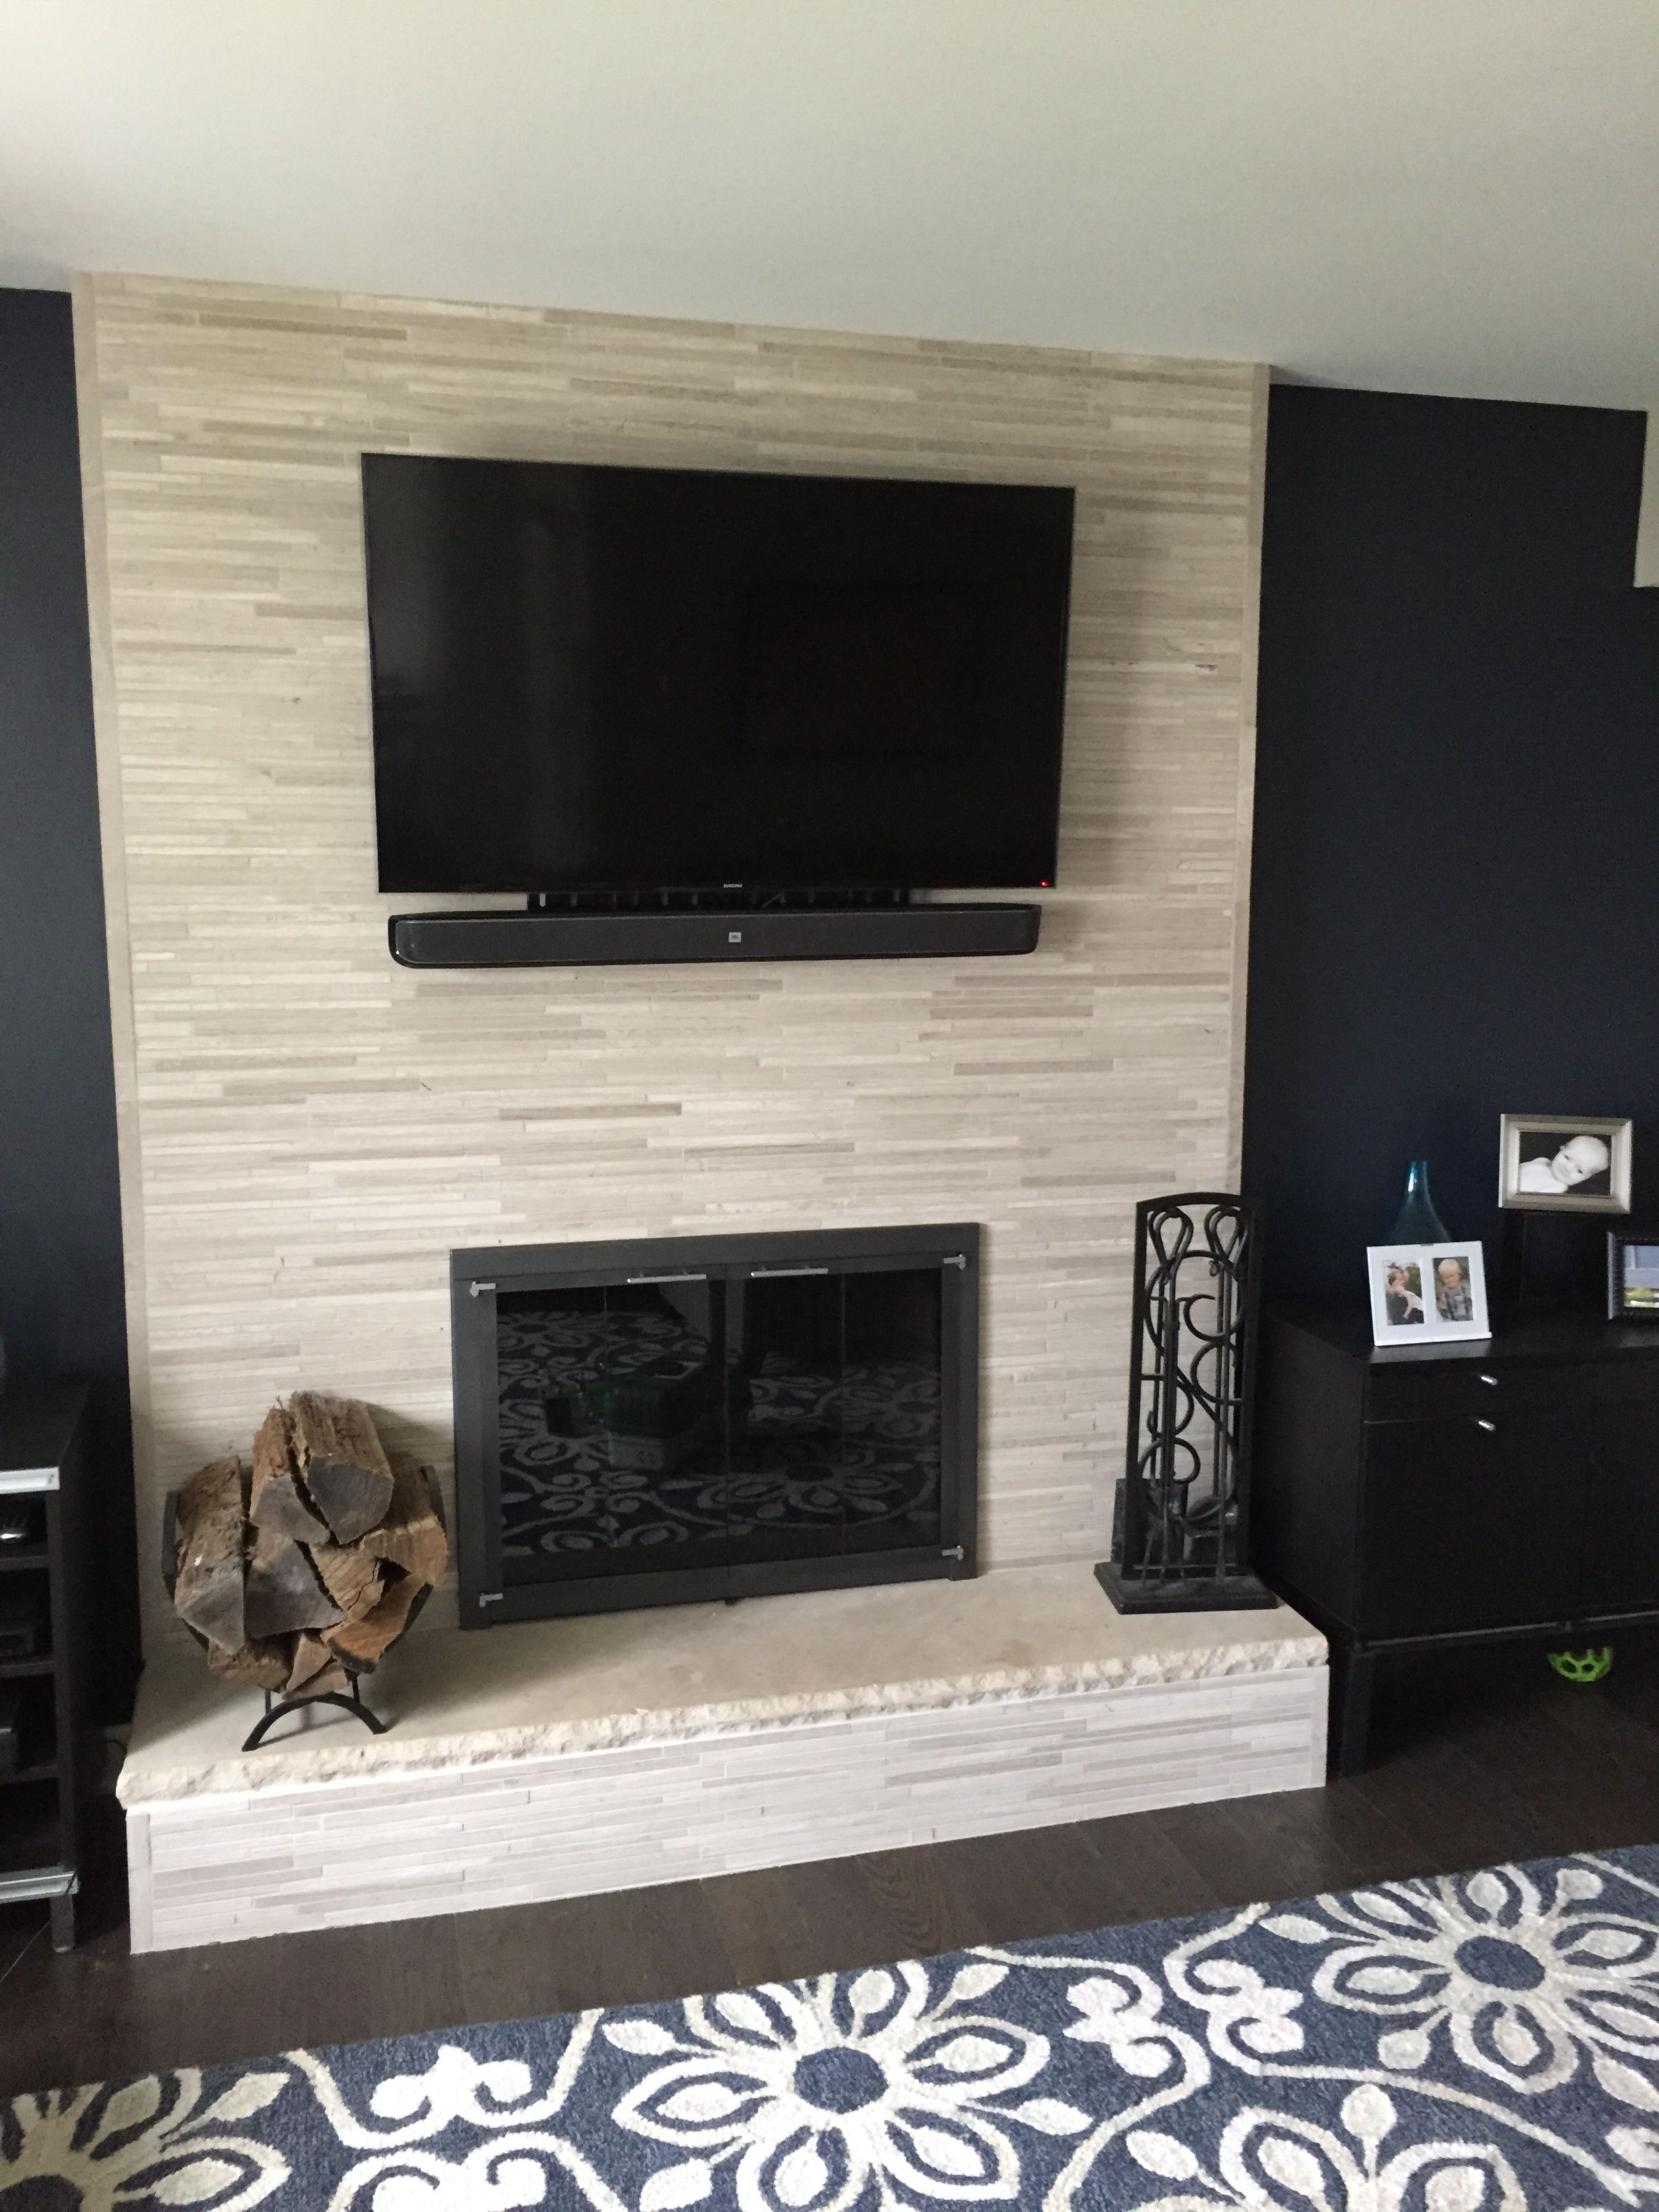 Vintage Fireplace Inserts Awesome Our Old Fireplace Was 80 S 90 S Brick Veneer to Give It An